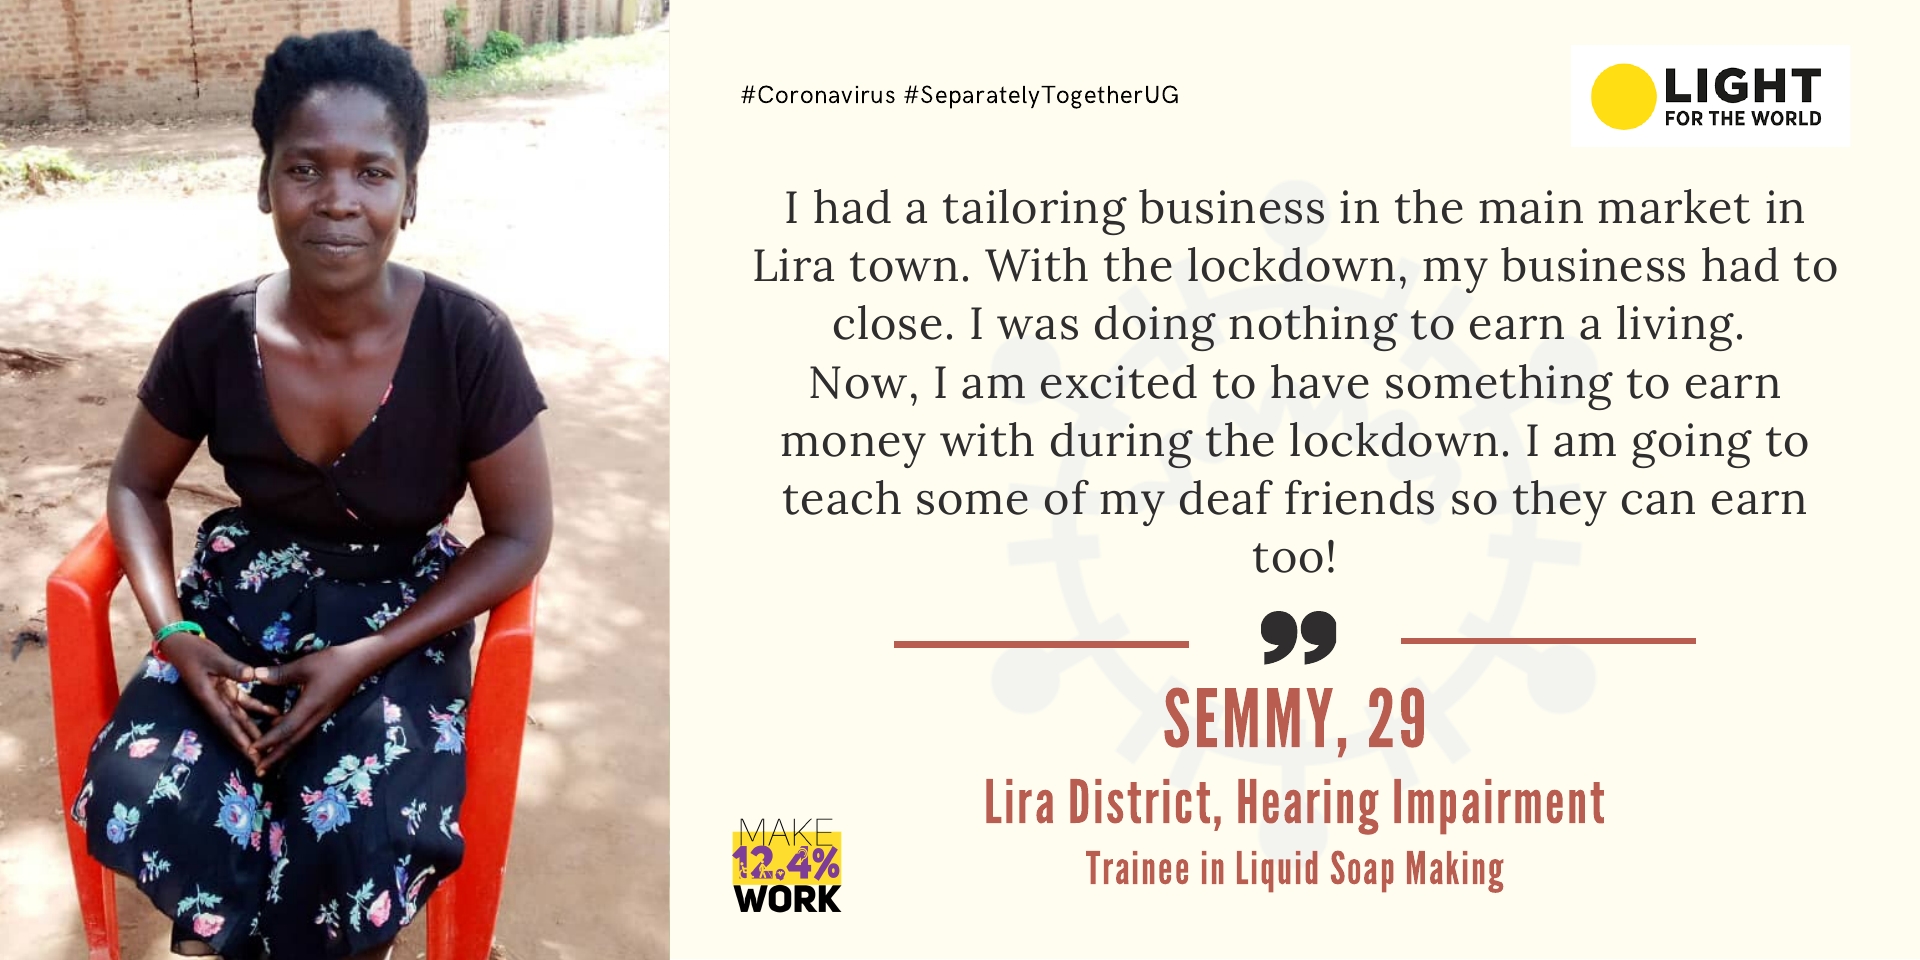 Semmy is 29 years, has a hearing impairment and lives in Lira Town. She says I had a tailoring business in the main market in Lira town. With the lockdown, my business had to close. I was doing nothing to earn a living. Now, I am excited to have something to earn money with during the lockdown. I am going to teach some of my deaf friends so they can earn too! 